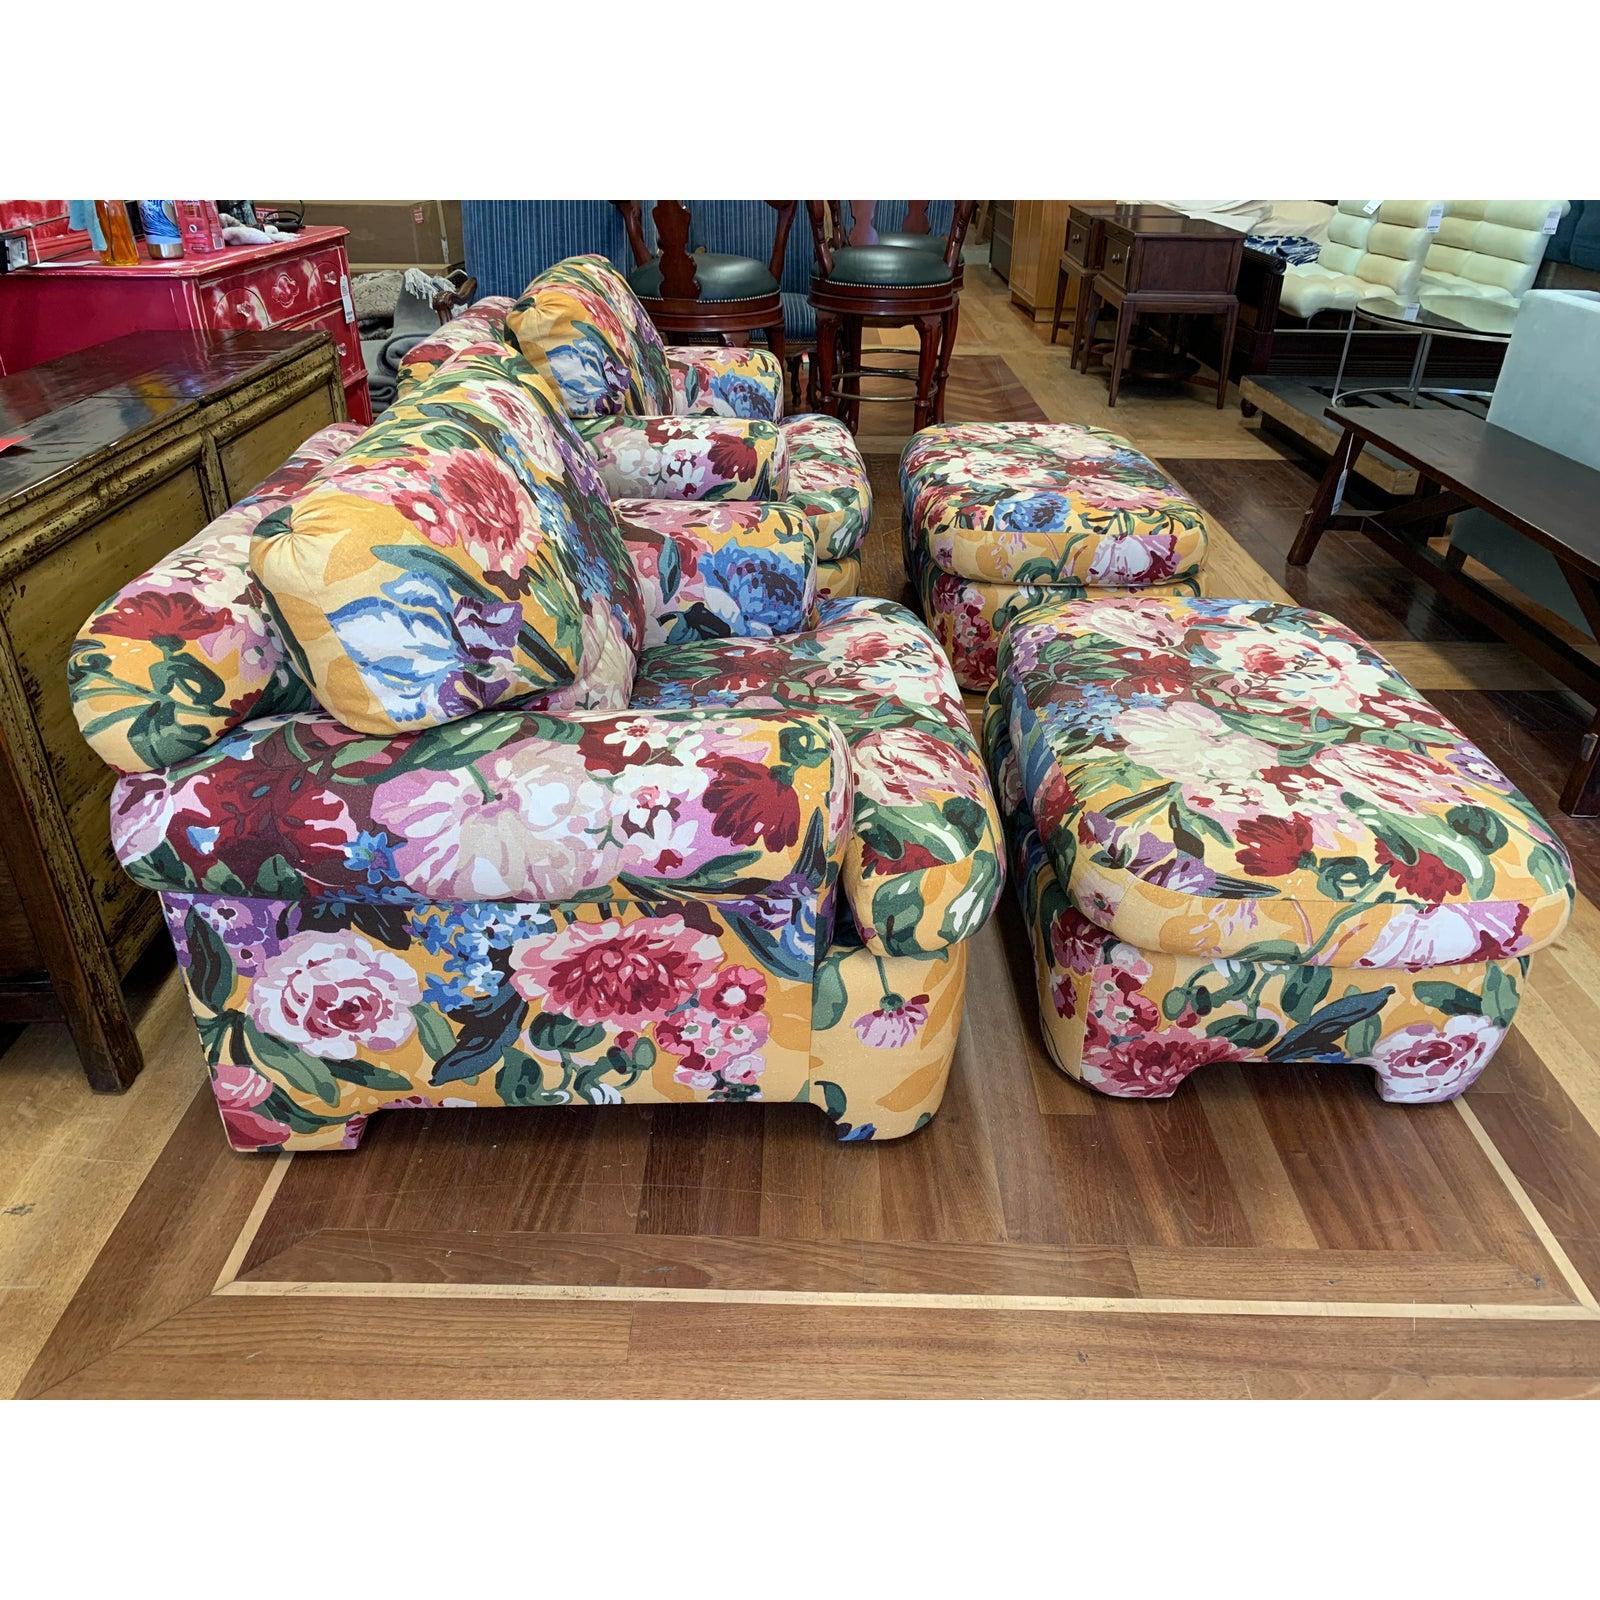 Presents a pair of custom lounge chairs and ottomans by Kroll Furniture. The frame is crafted from solid wood. Rolled arms with a rolled back. Upholstered from bottom to top in a vibrant floral print fabric. Consist of a loose seat and back cushion